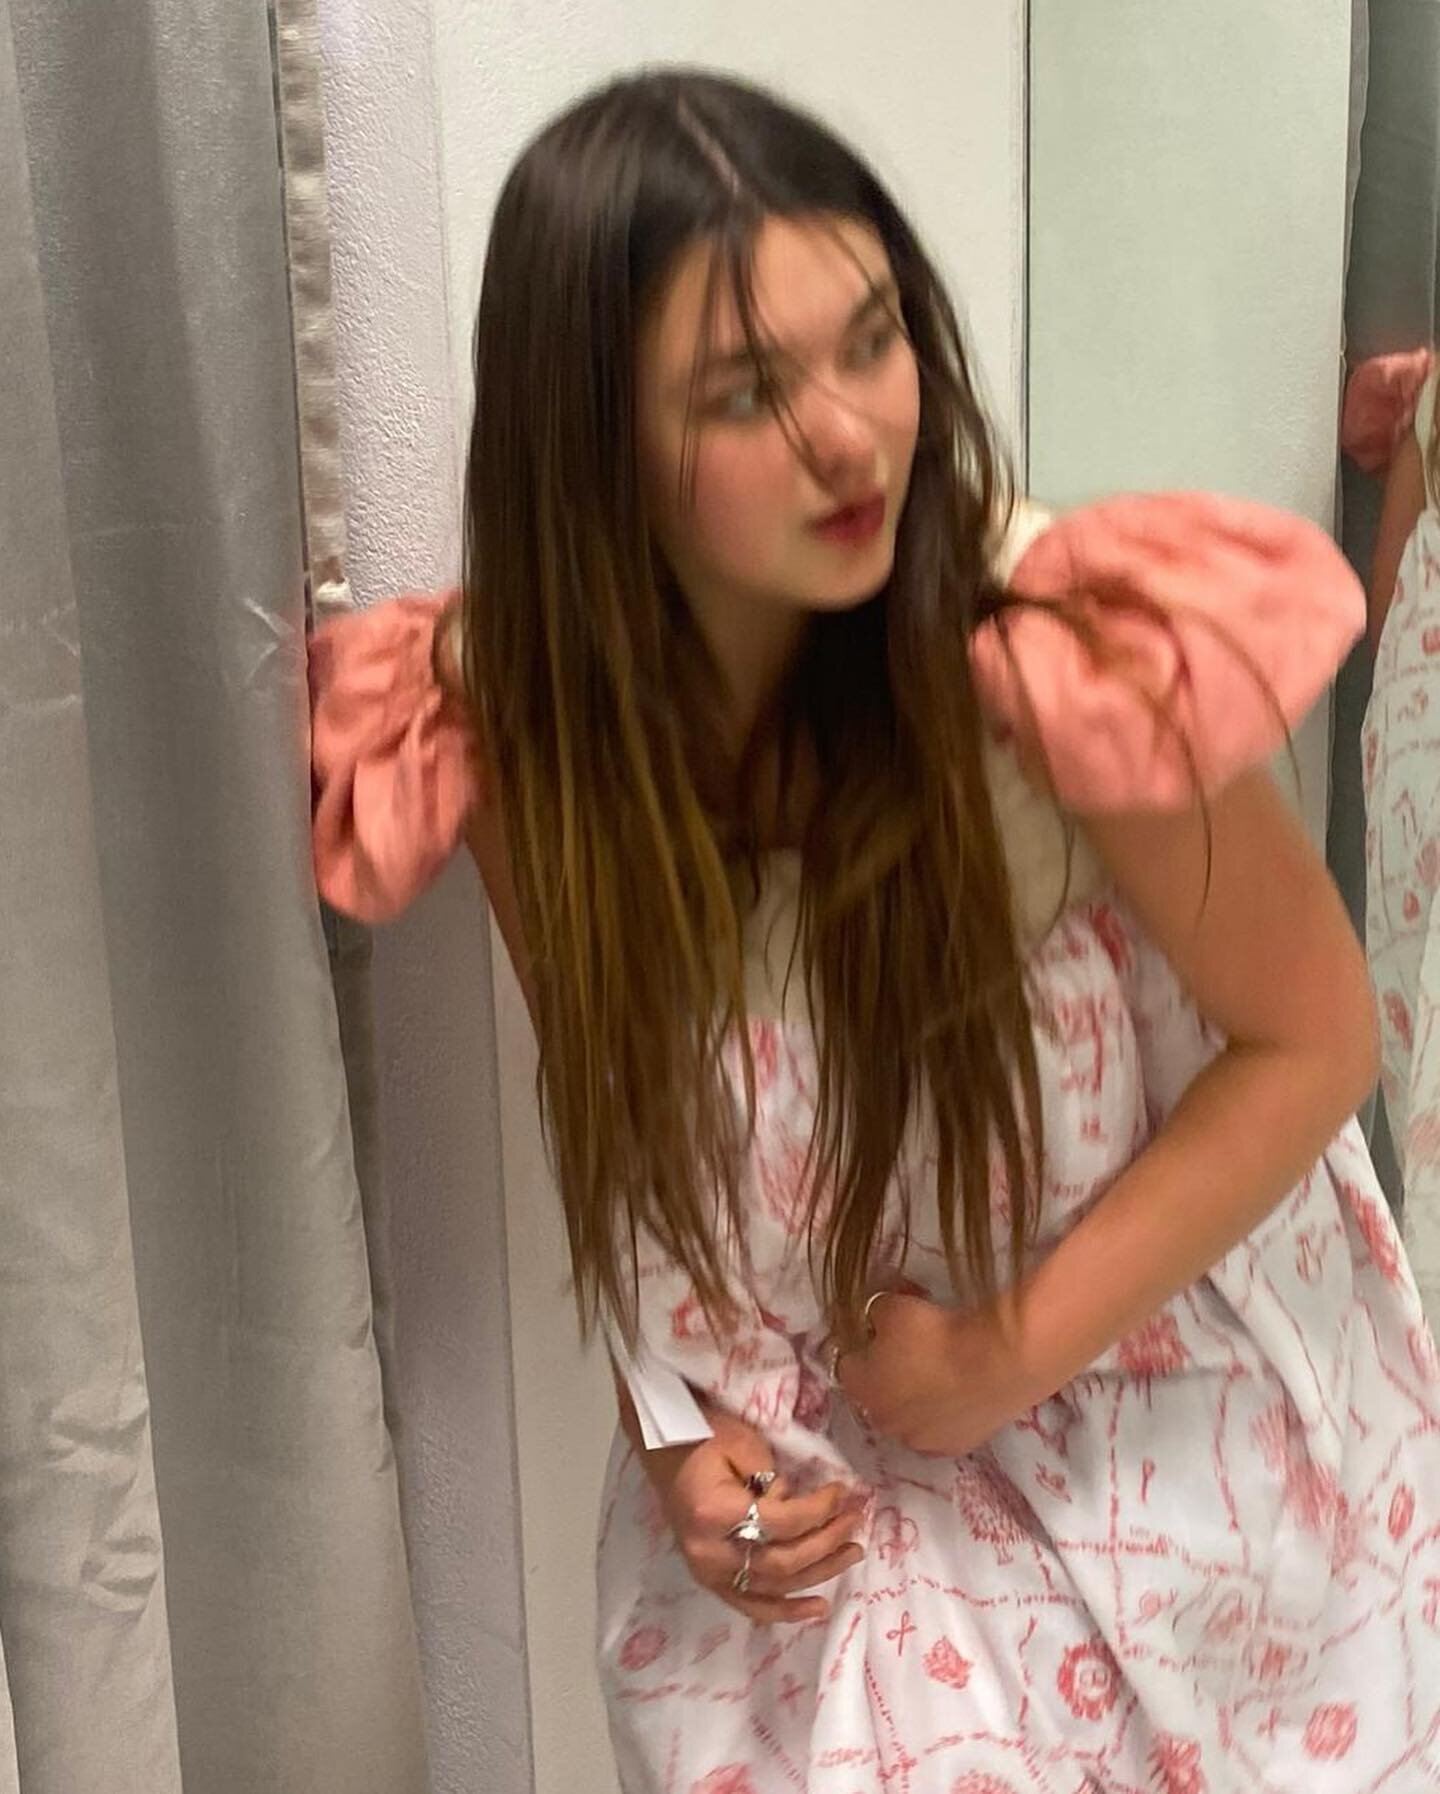 Reminder rabbit rail is still in the iconic pop up store in Mayfair! 🐇 SS23 is available to purchase irl and via dm while we wait for the web update 🕸

14-15 Conduit street 

Cute pics from @mayonnaisydaisy in the Molly Dress